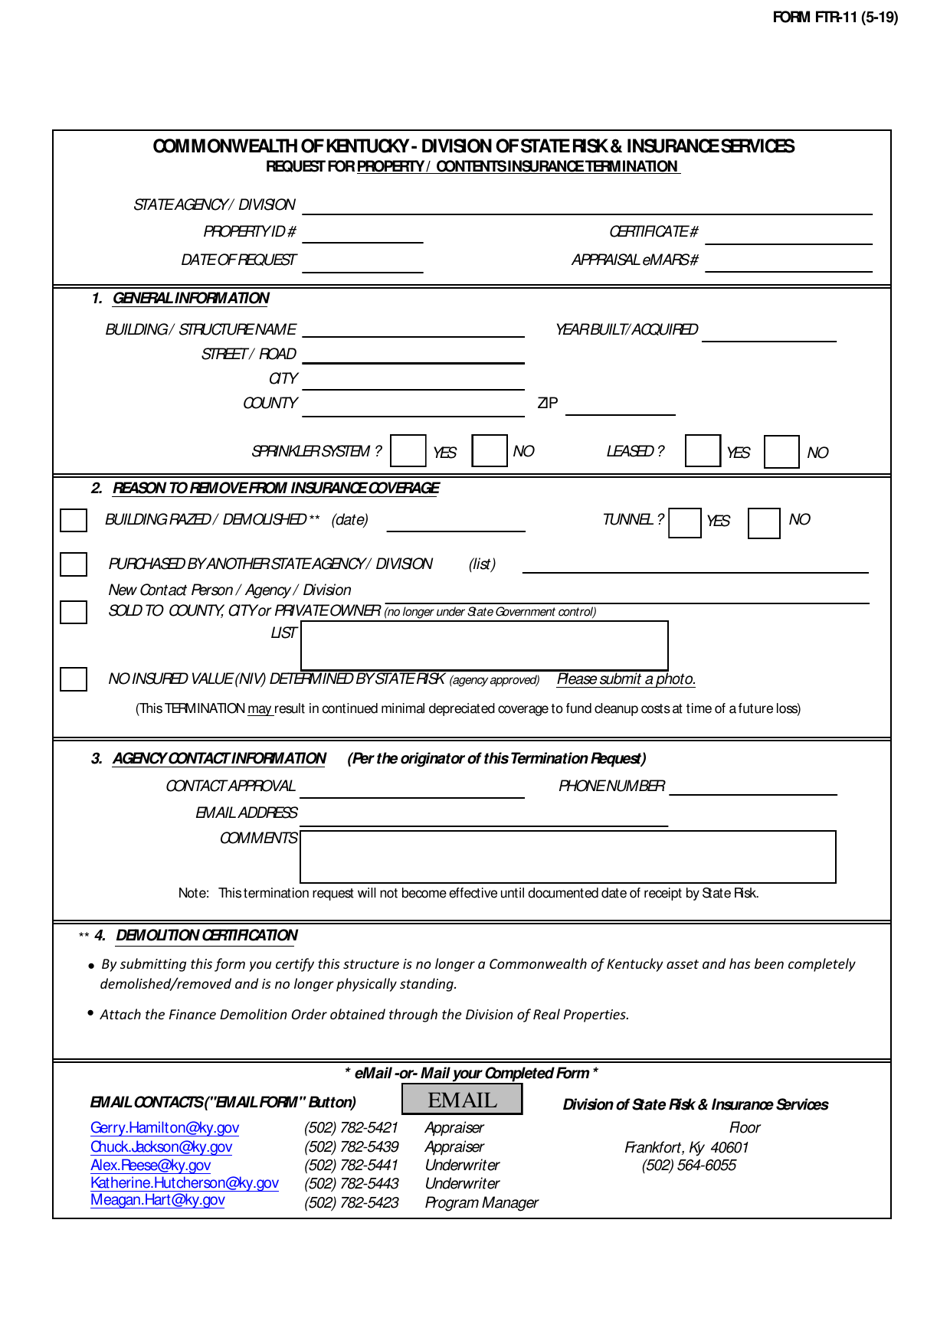 Form FTR-11 Request for Property / Contents Insurance Termination - Kentucky, Page 1